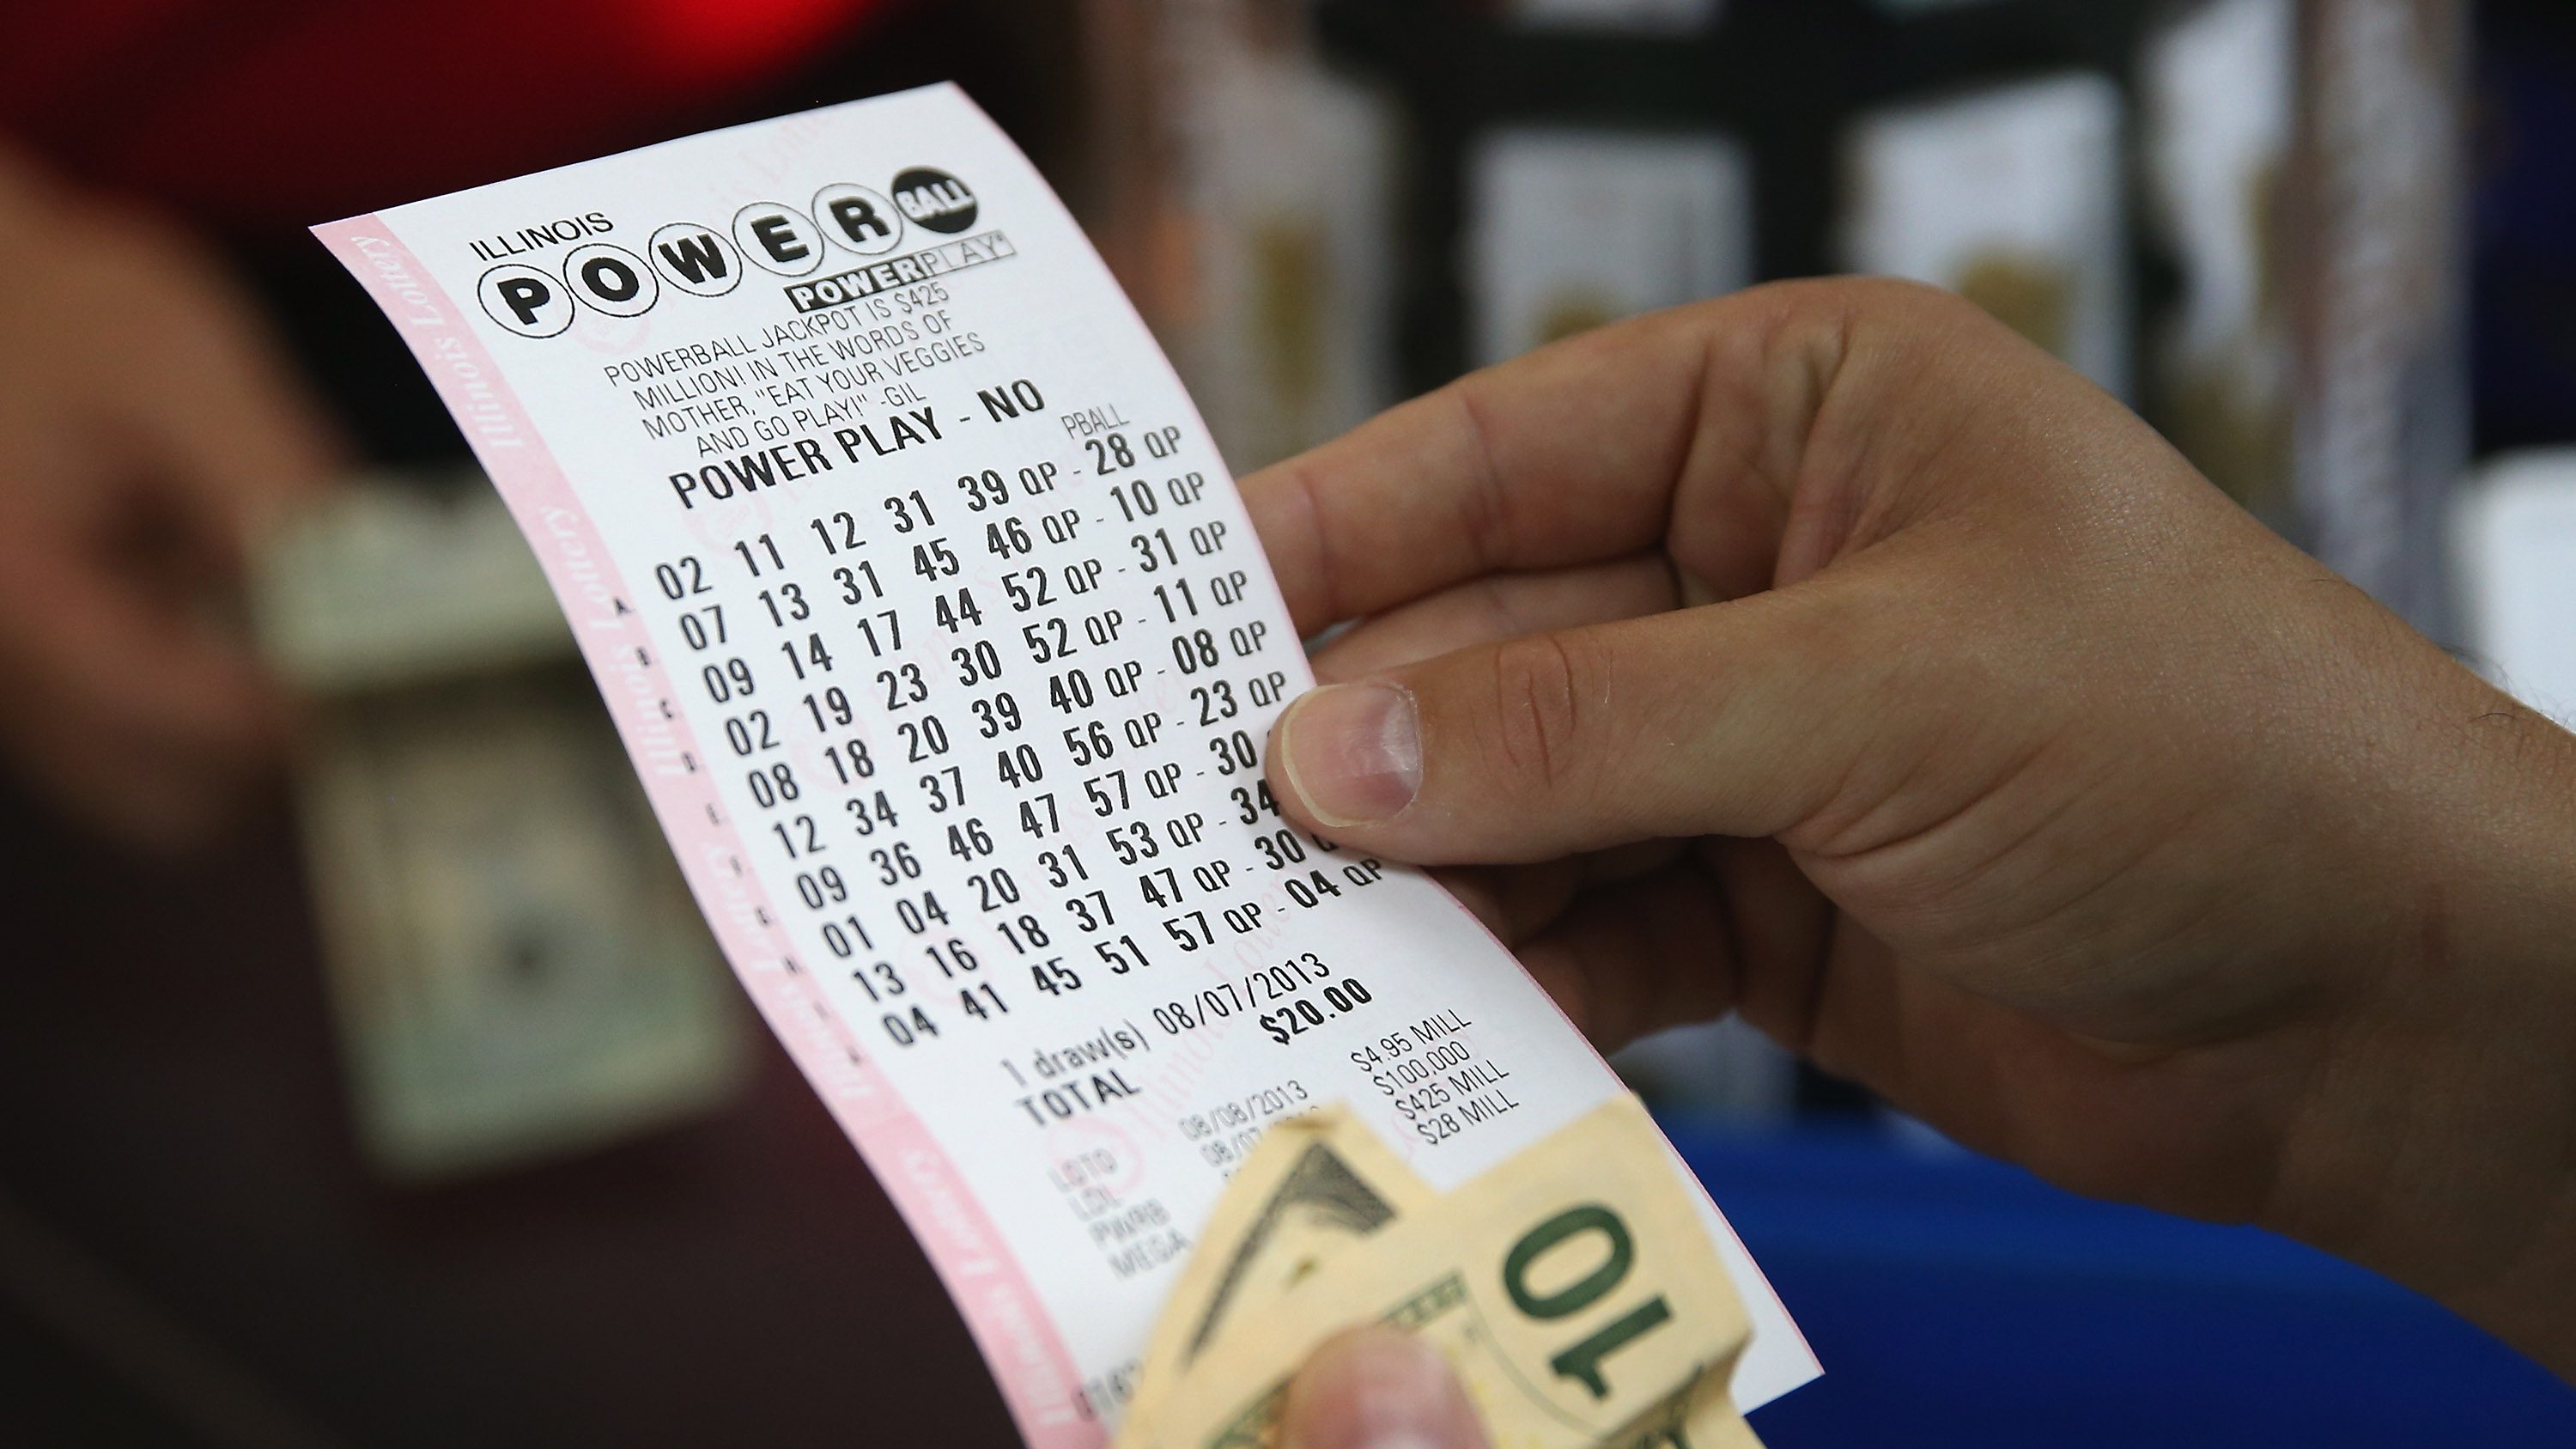 badger 5 lottery ticket winning numbers